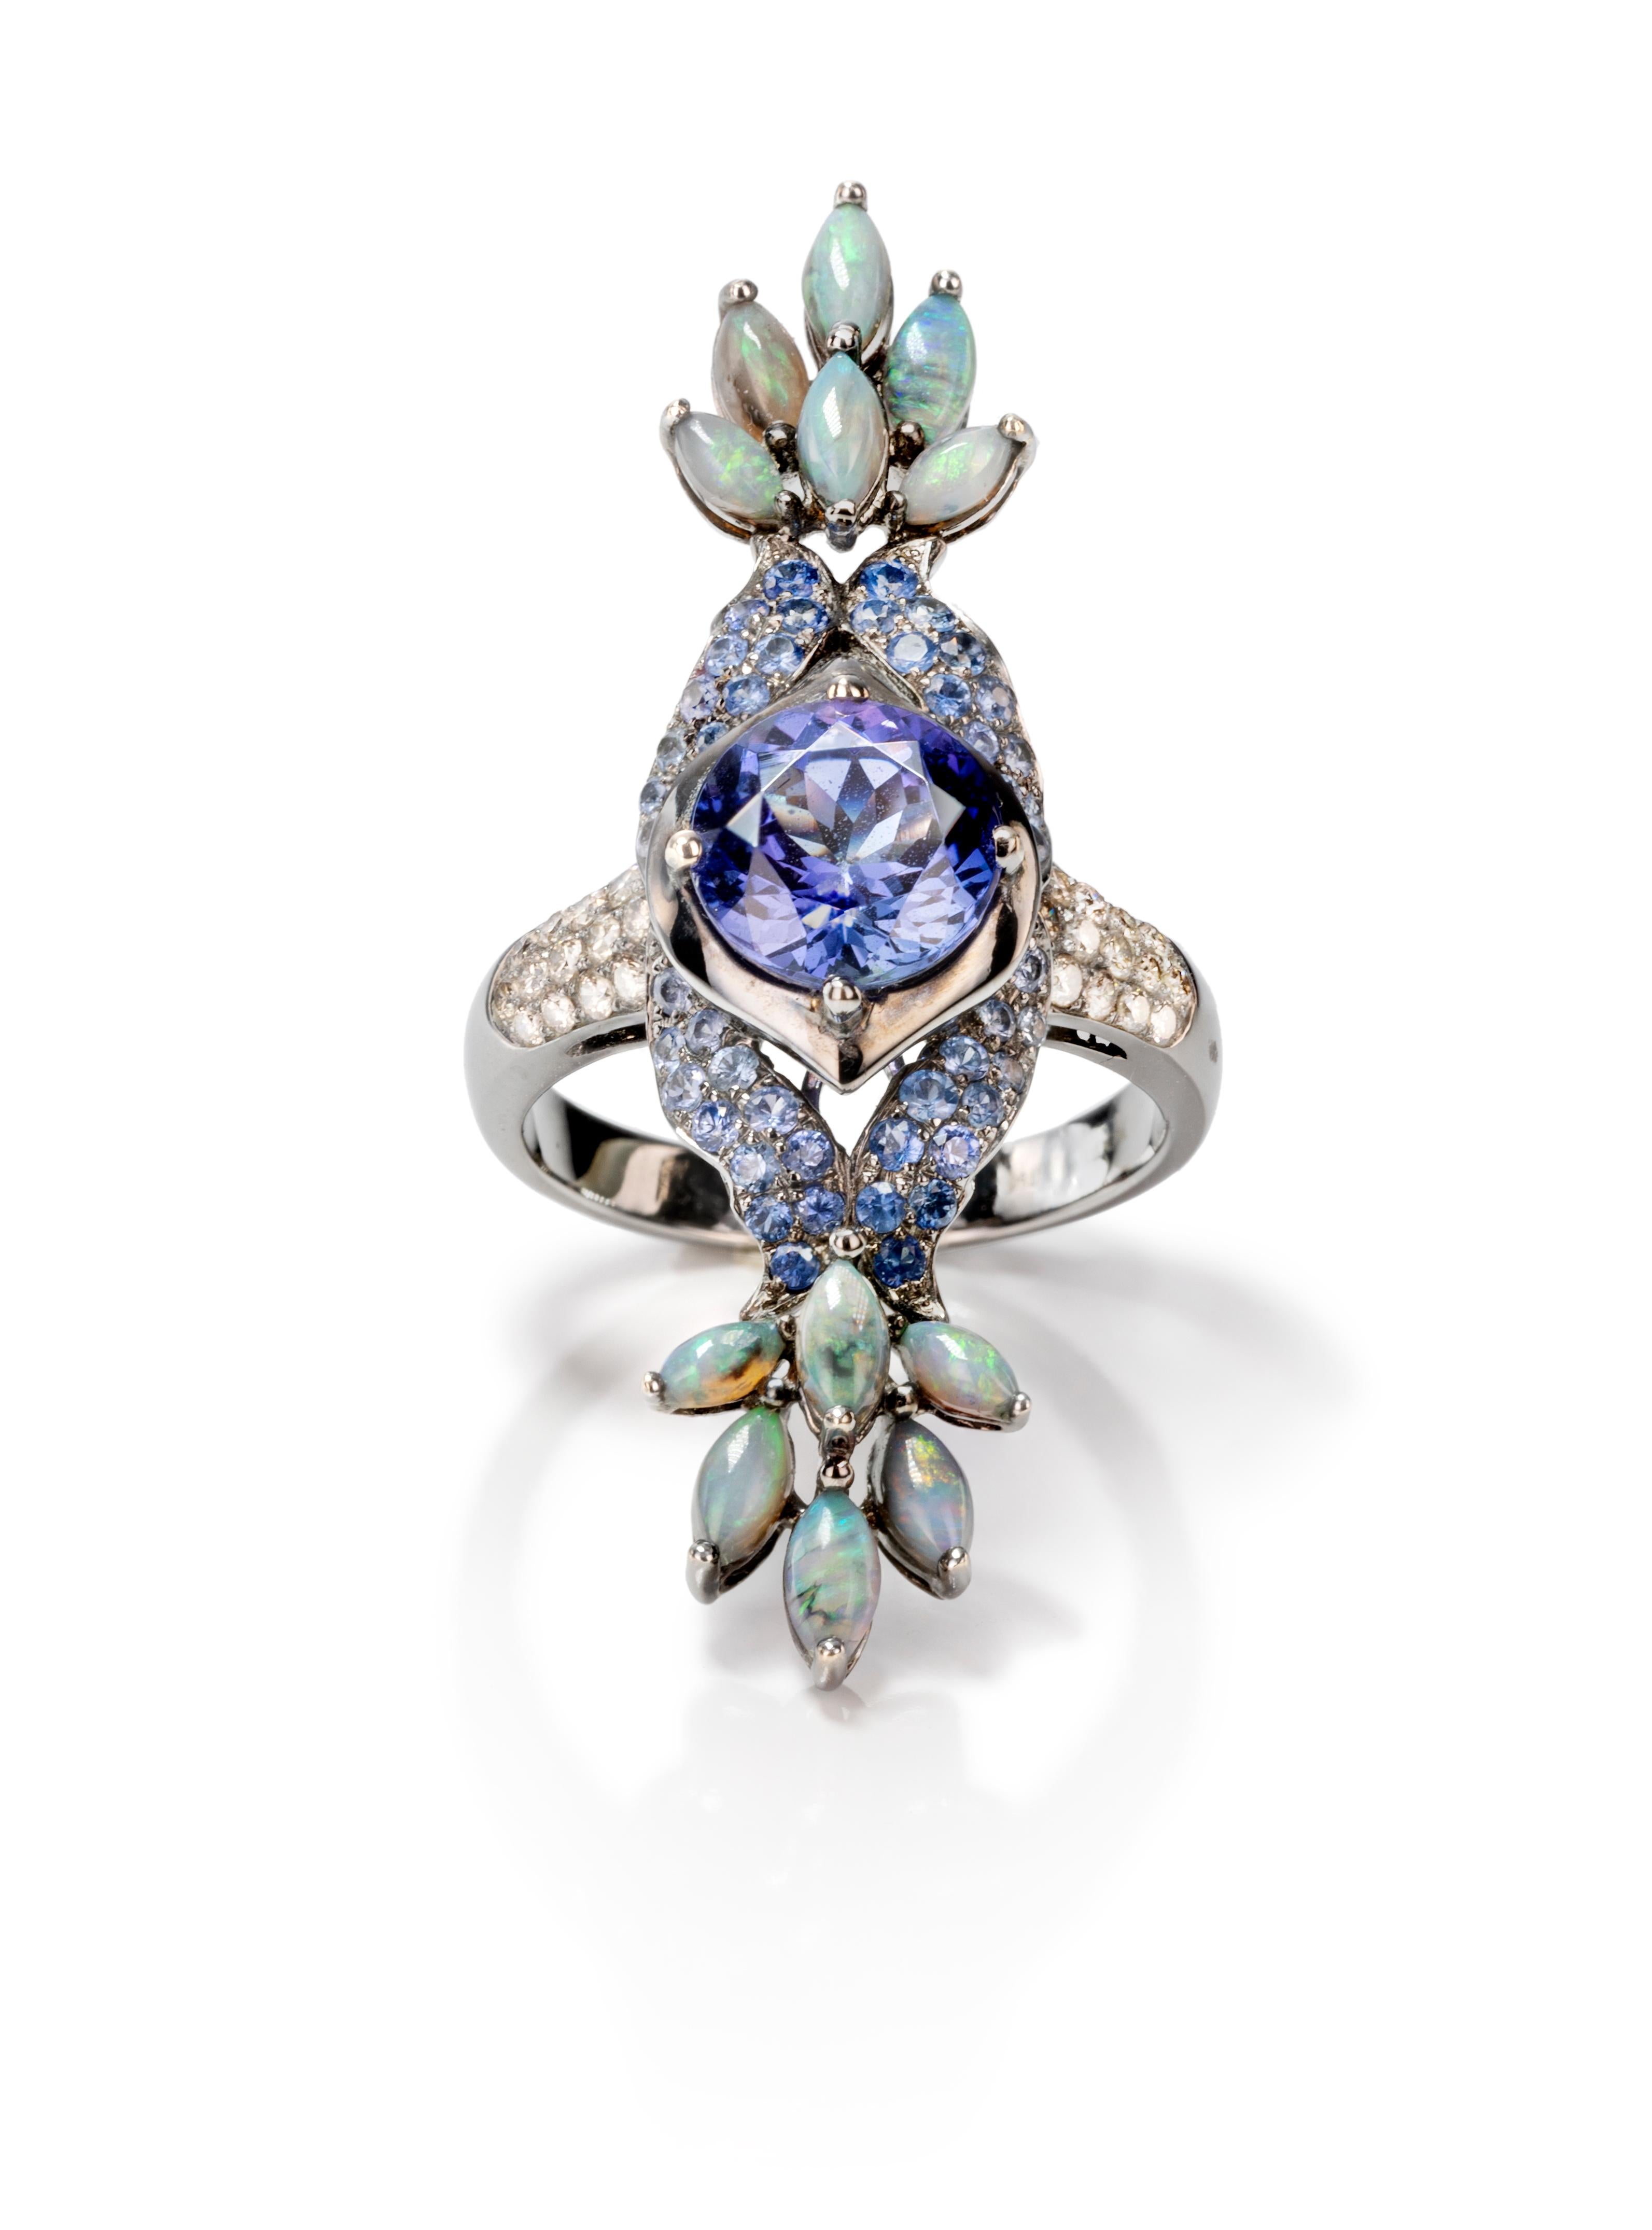 As the peacock displays its feathers in a flourish of color, the Tanzanite and Opal Peacock Ring dazzles with sparkle and flare. A tanzanite stone sits atop an 18k white gold and diamond band and is surrounded by a shell of blue sapphires. Tails of